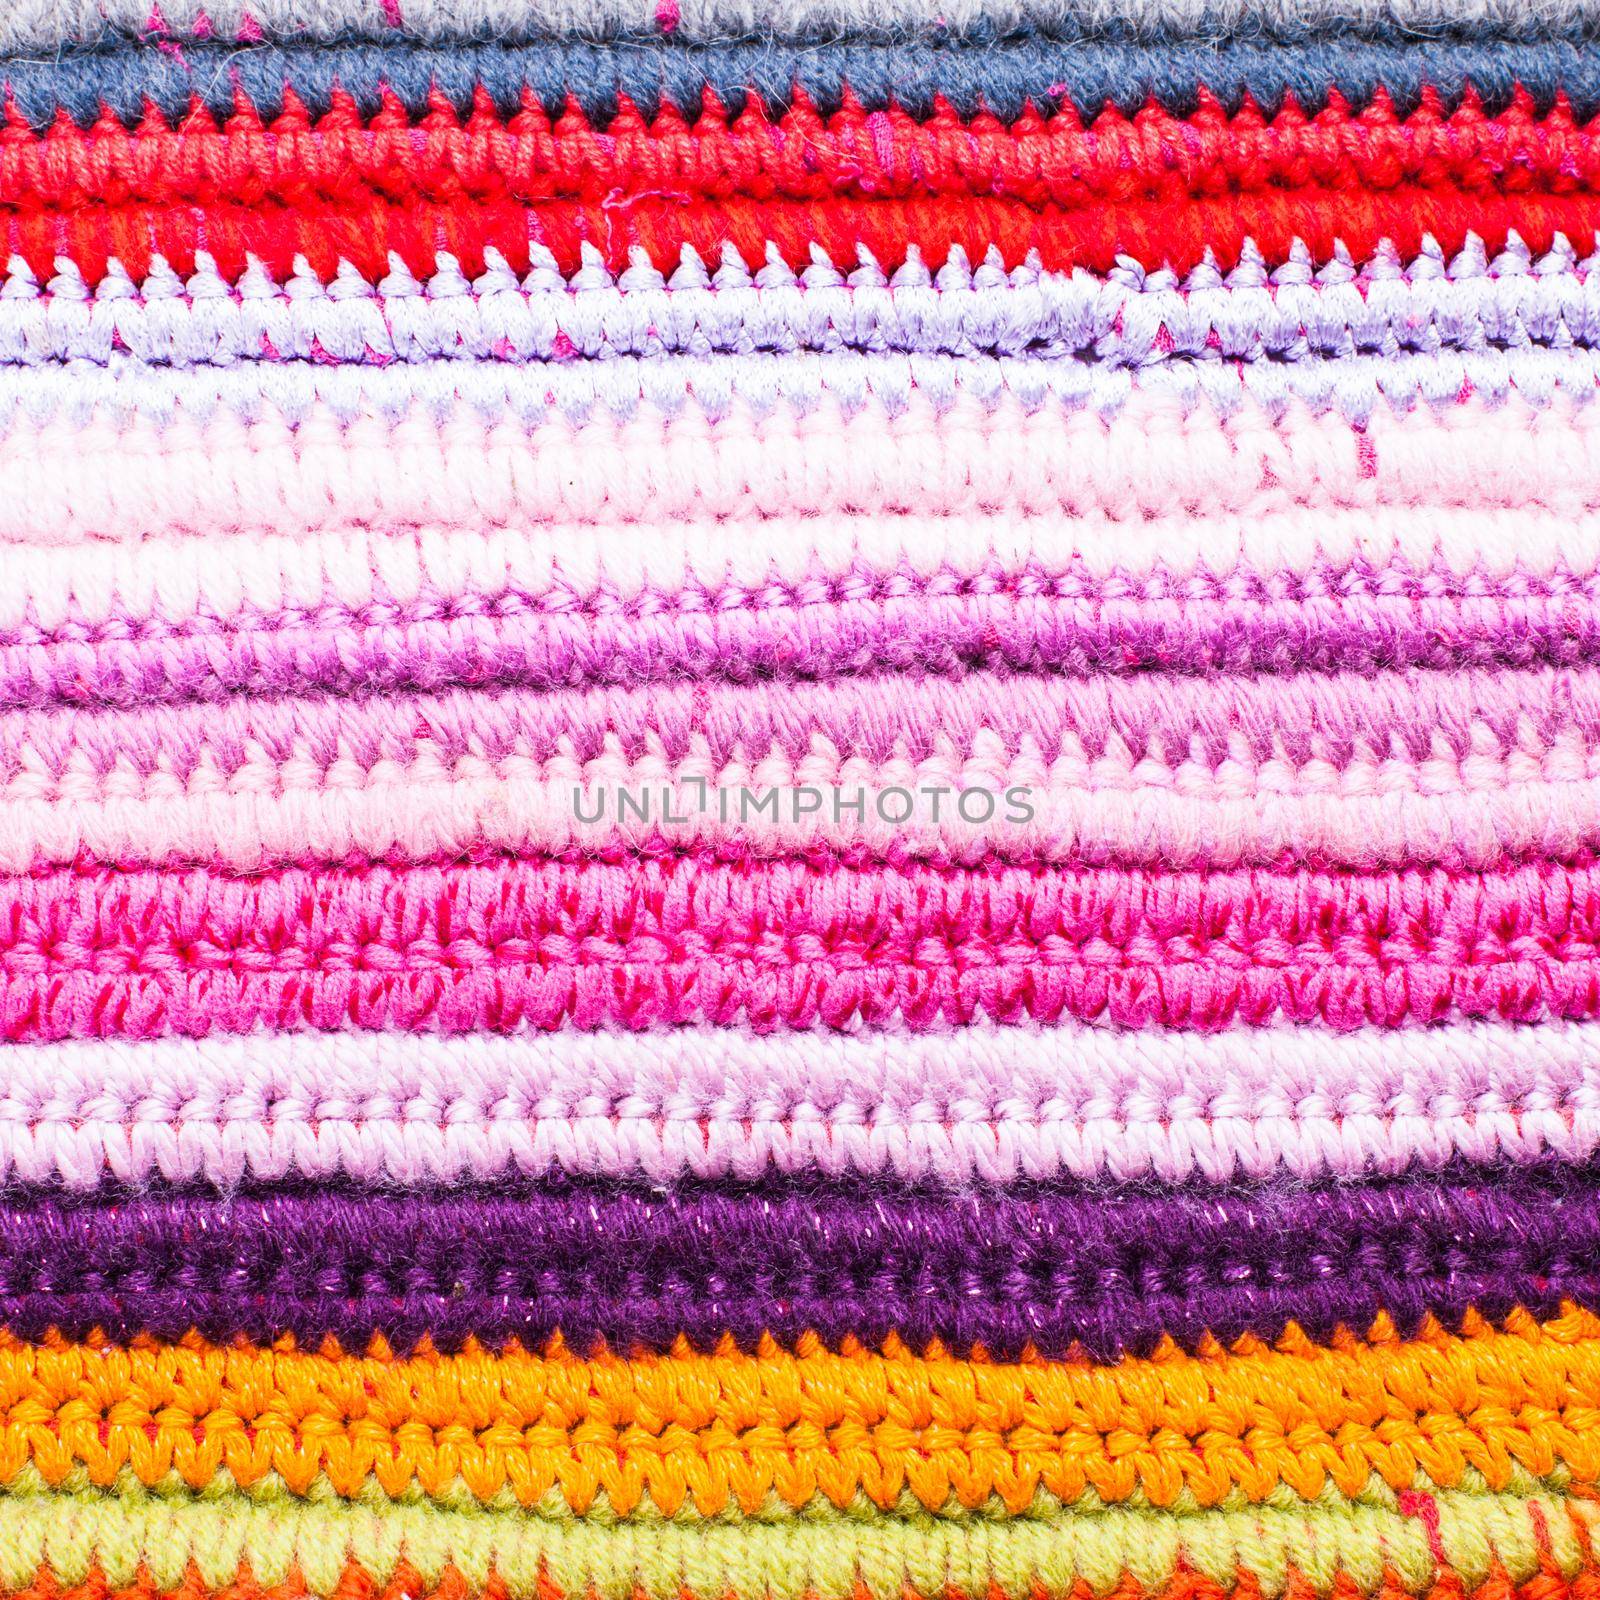 Crochet background with different colors, for design